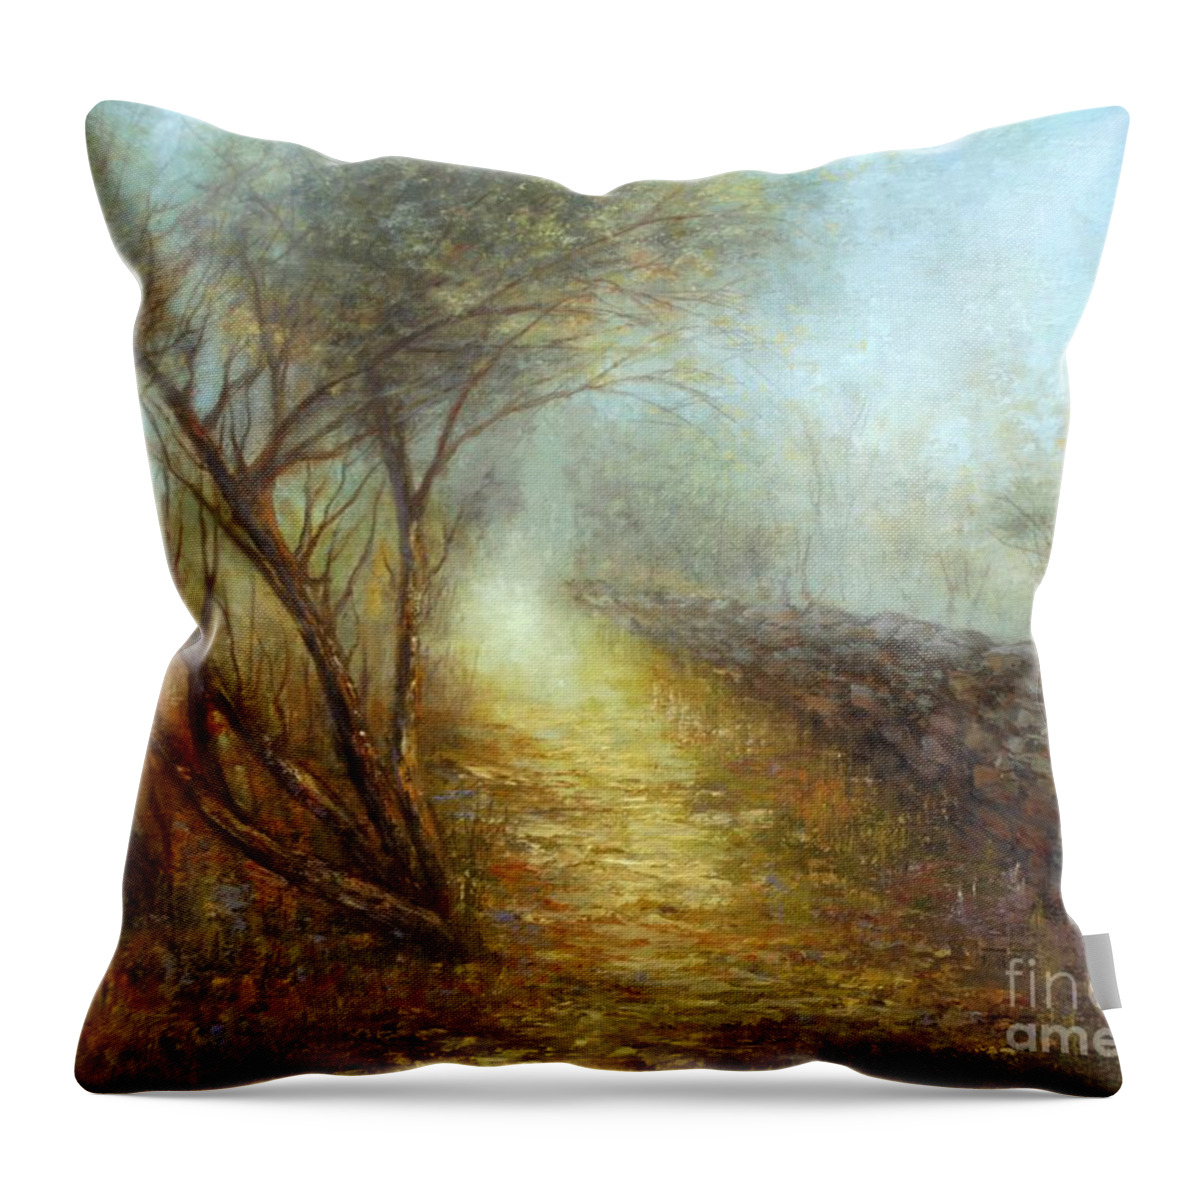 Landscape Throw Pillow featuring the painting Morning Mist by Valerie Travers